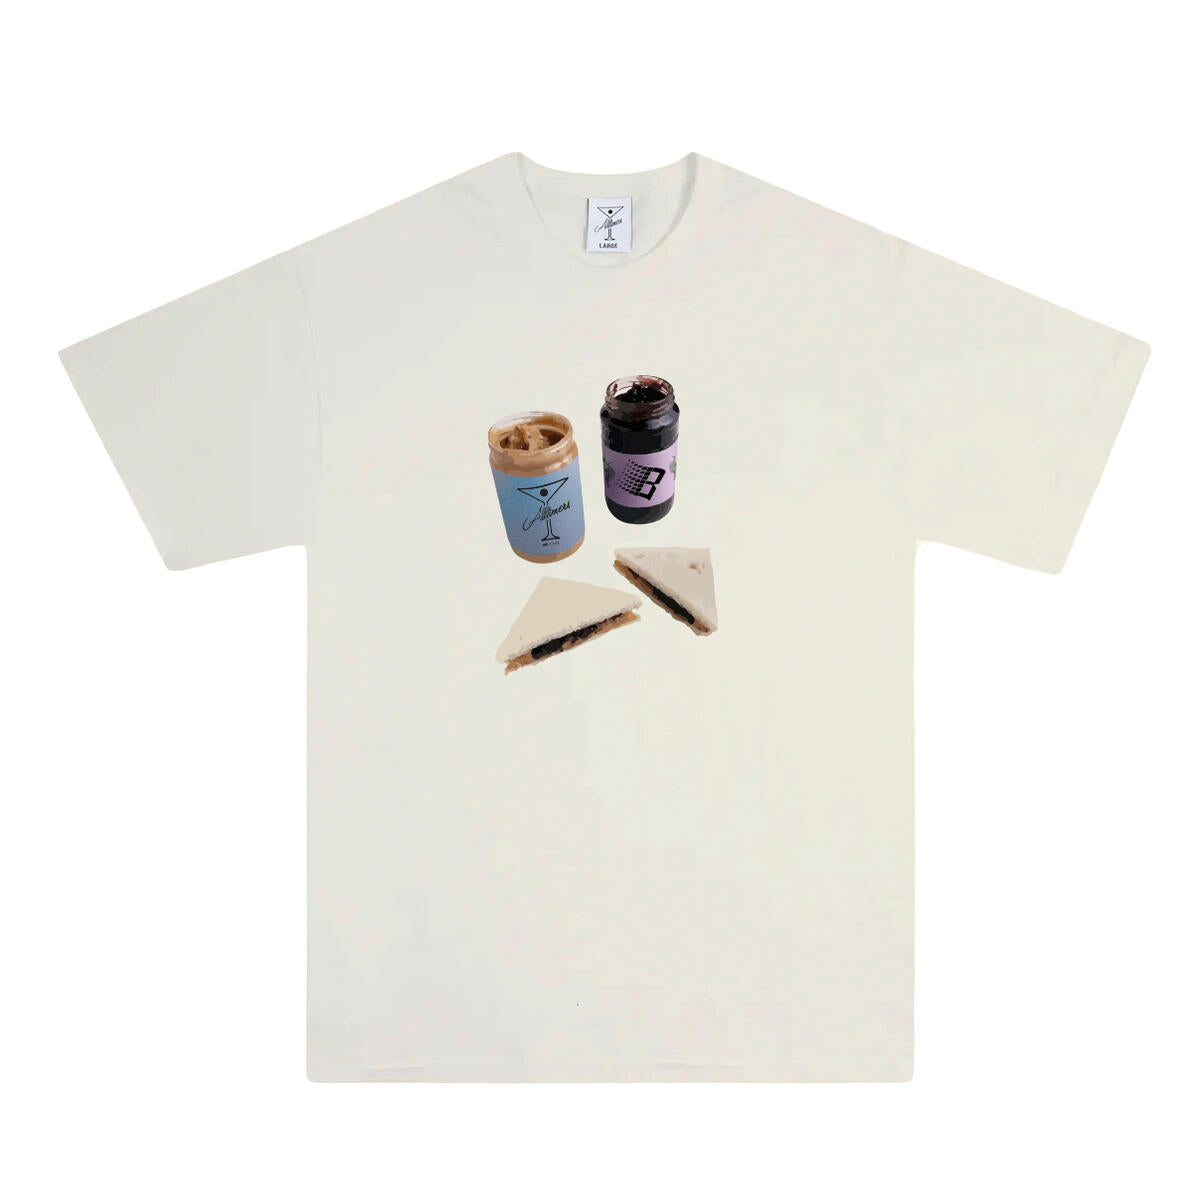 PB & J S/S Tee Shirt Natural(size options listed)